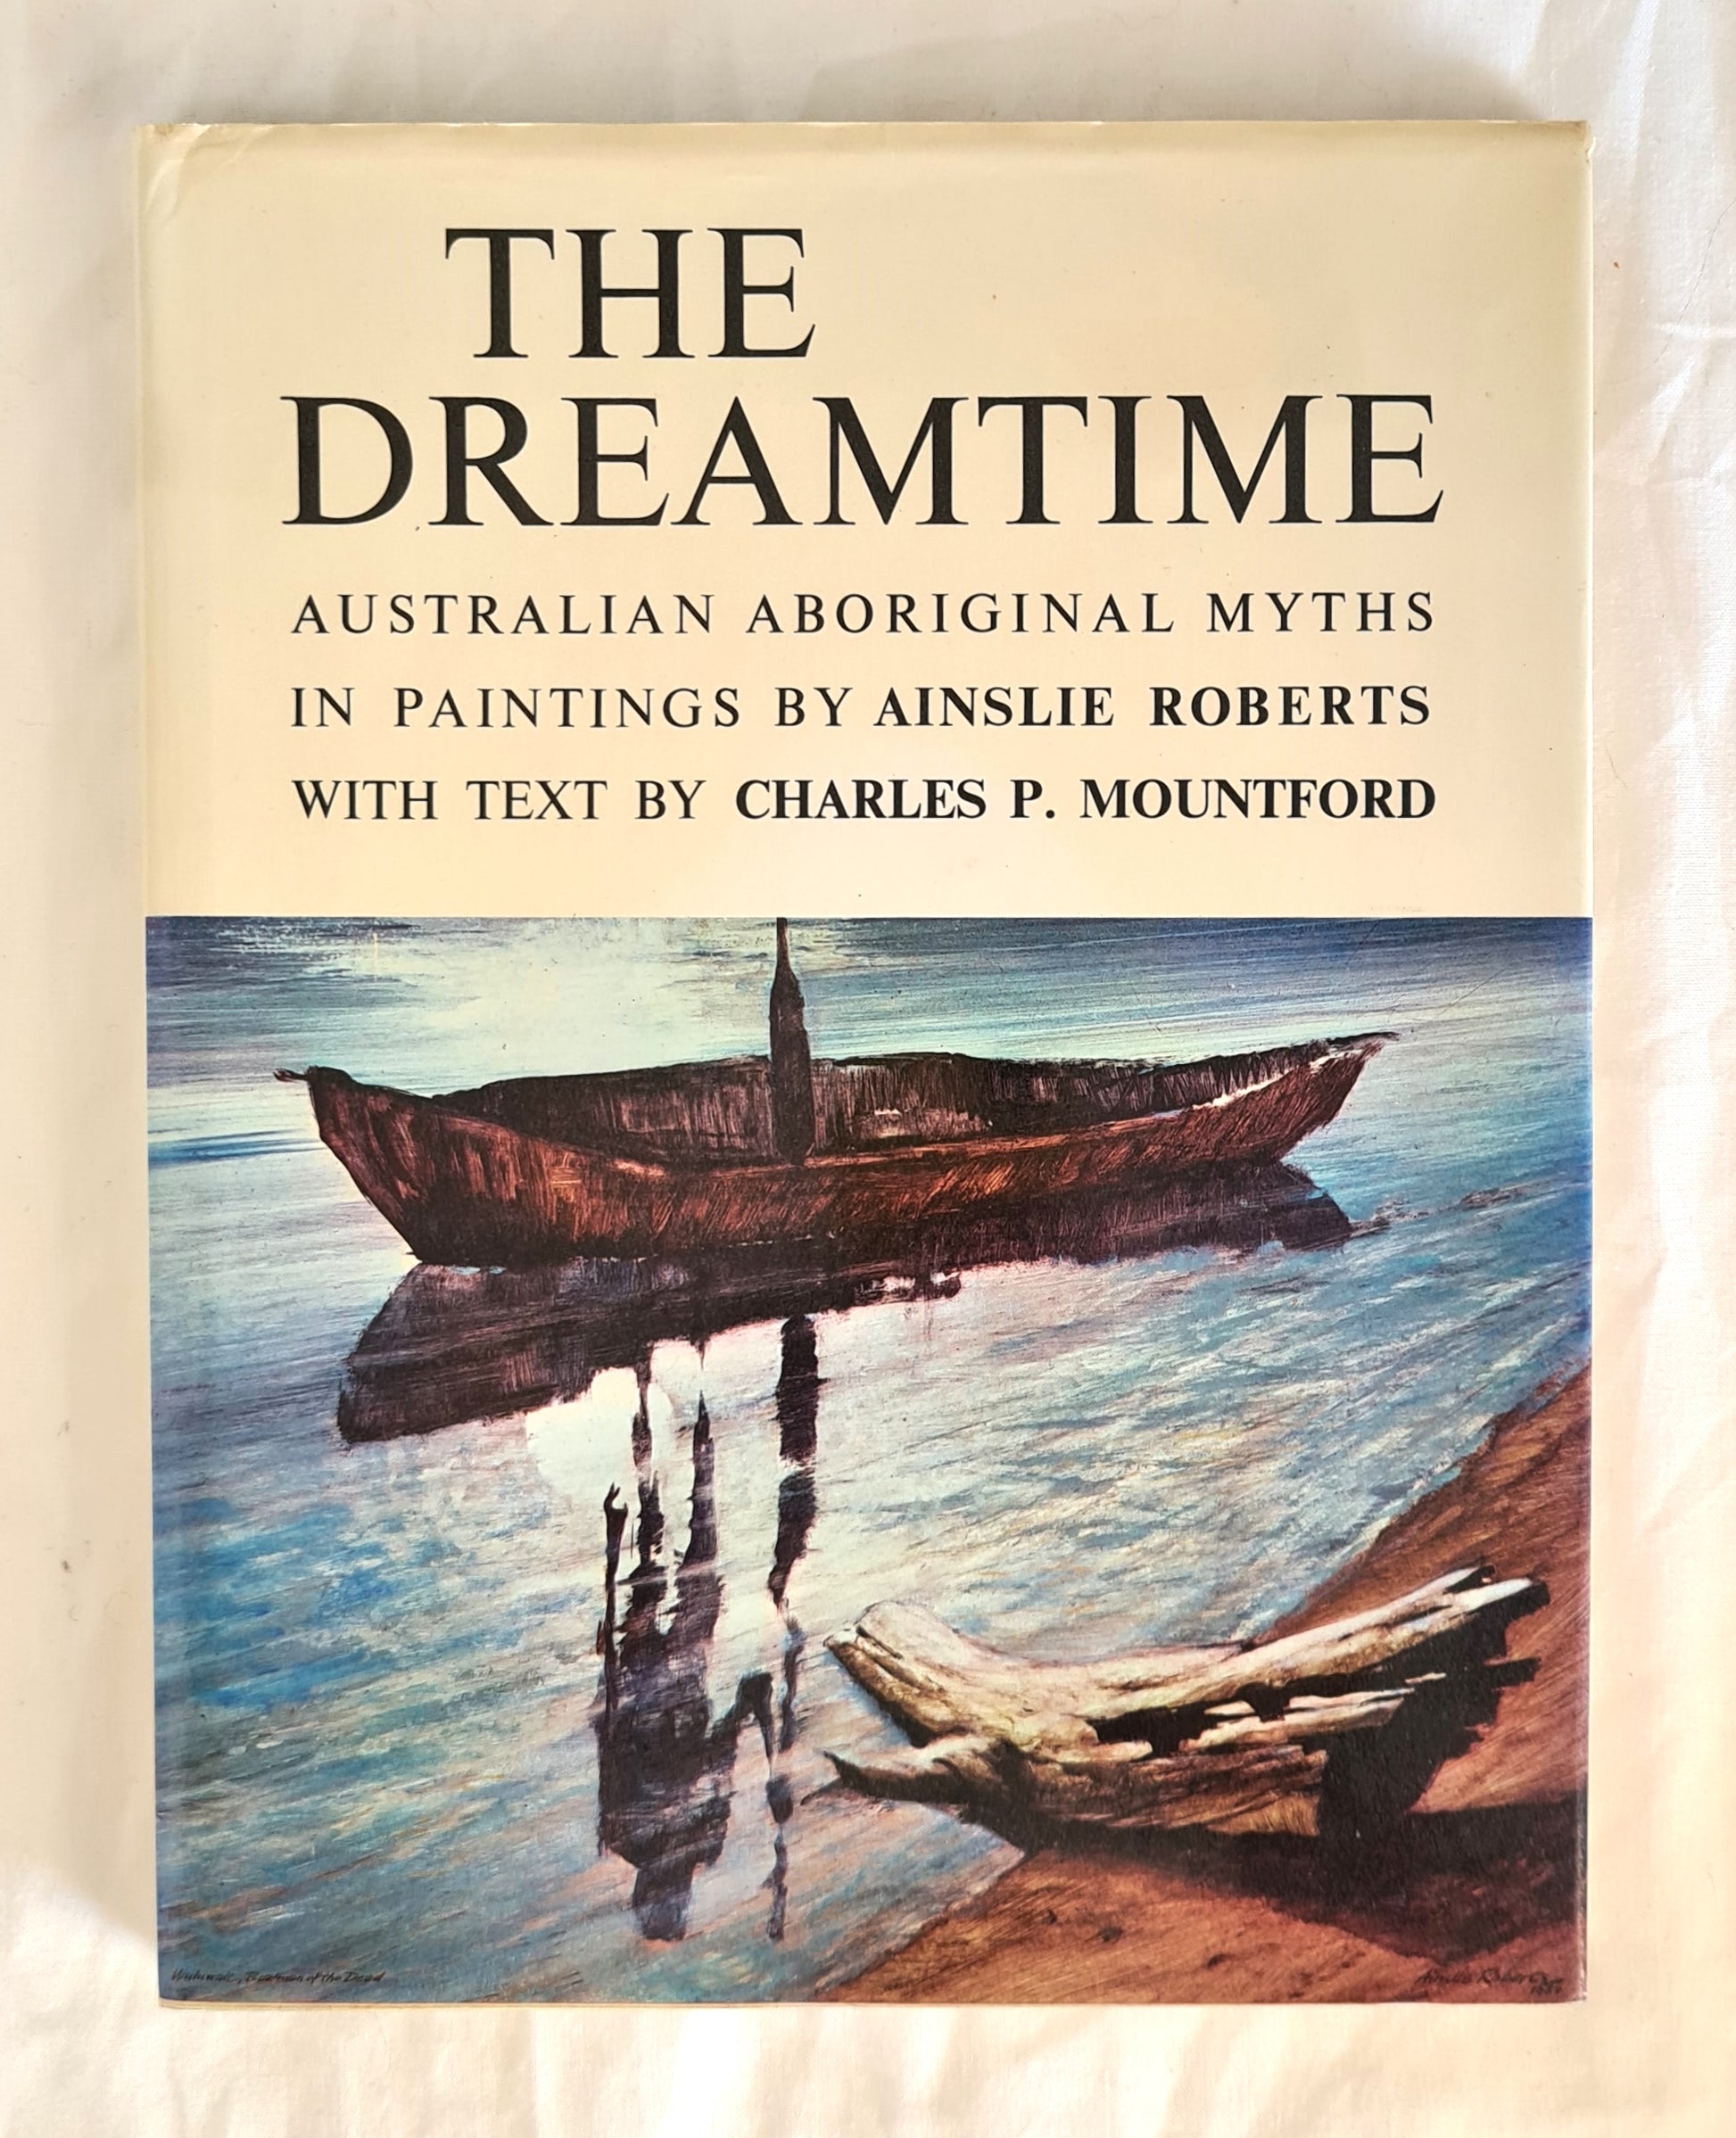 The Dreamtime  Australian Aboriginal Myths in Paintings  Paintings by Ainslie Roberts  Text by Charles P. Mountford